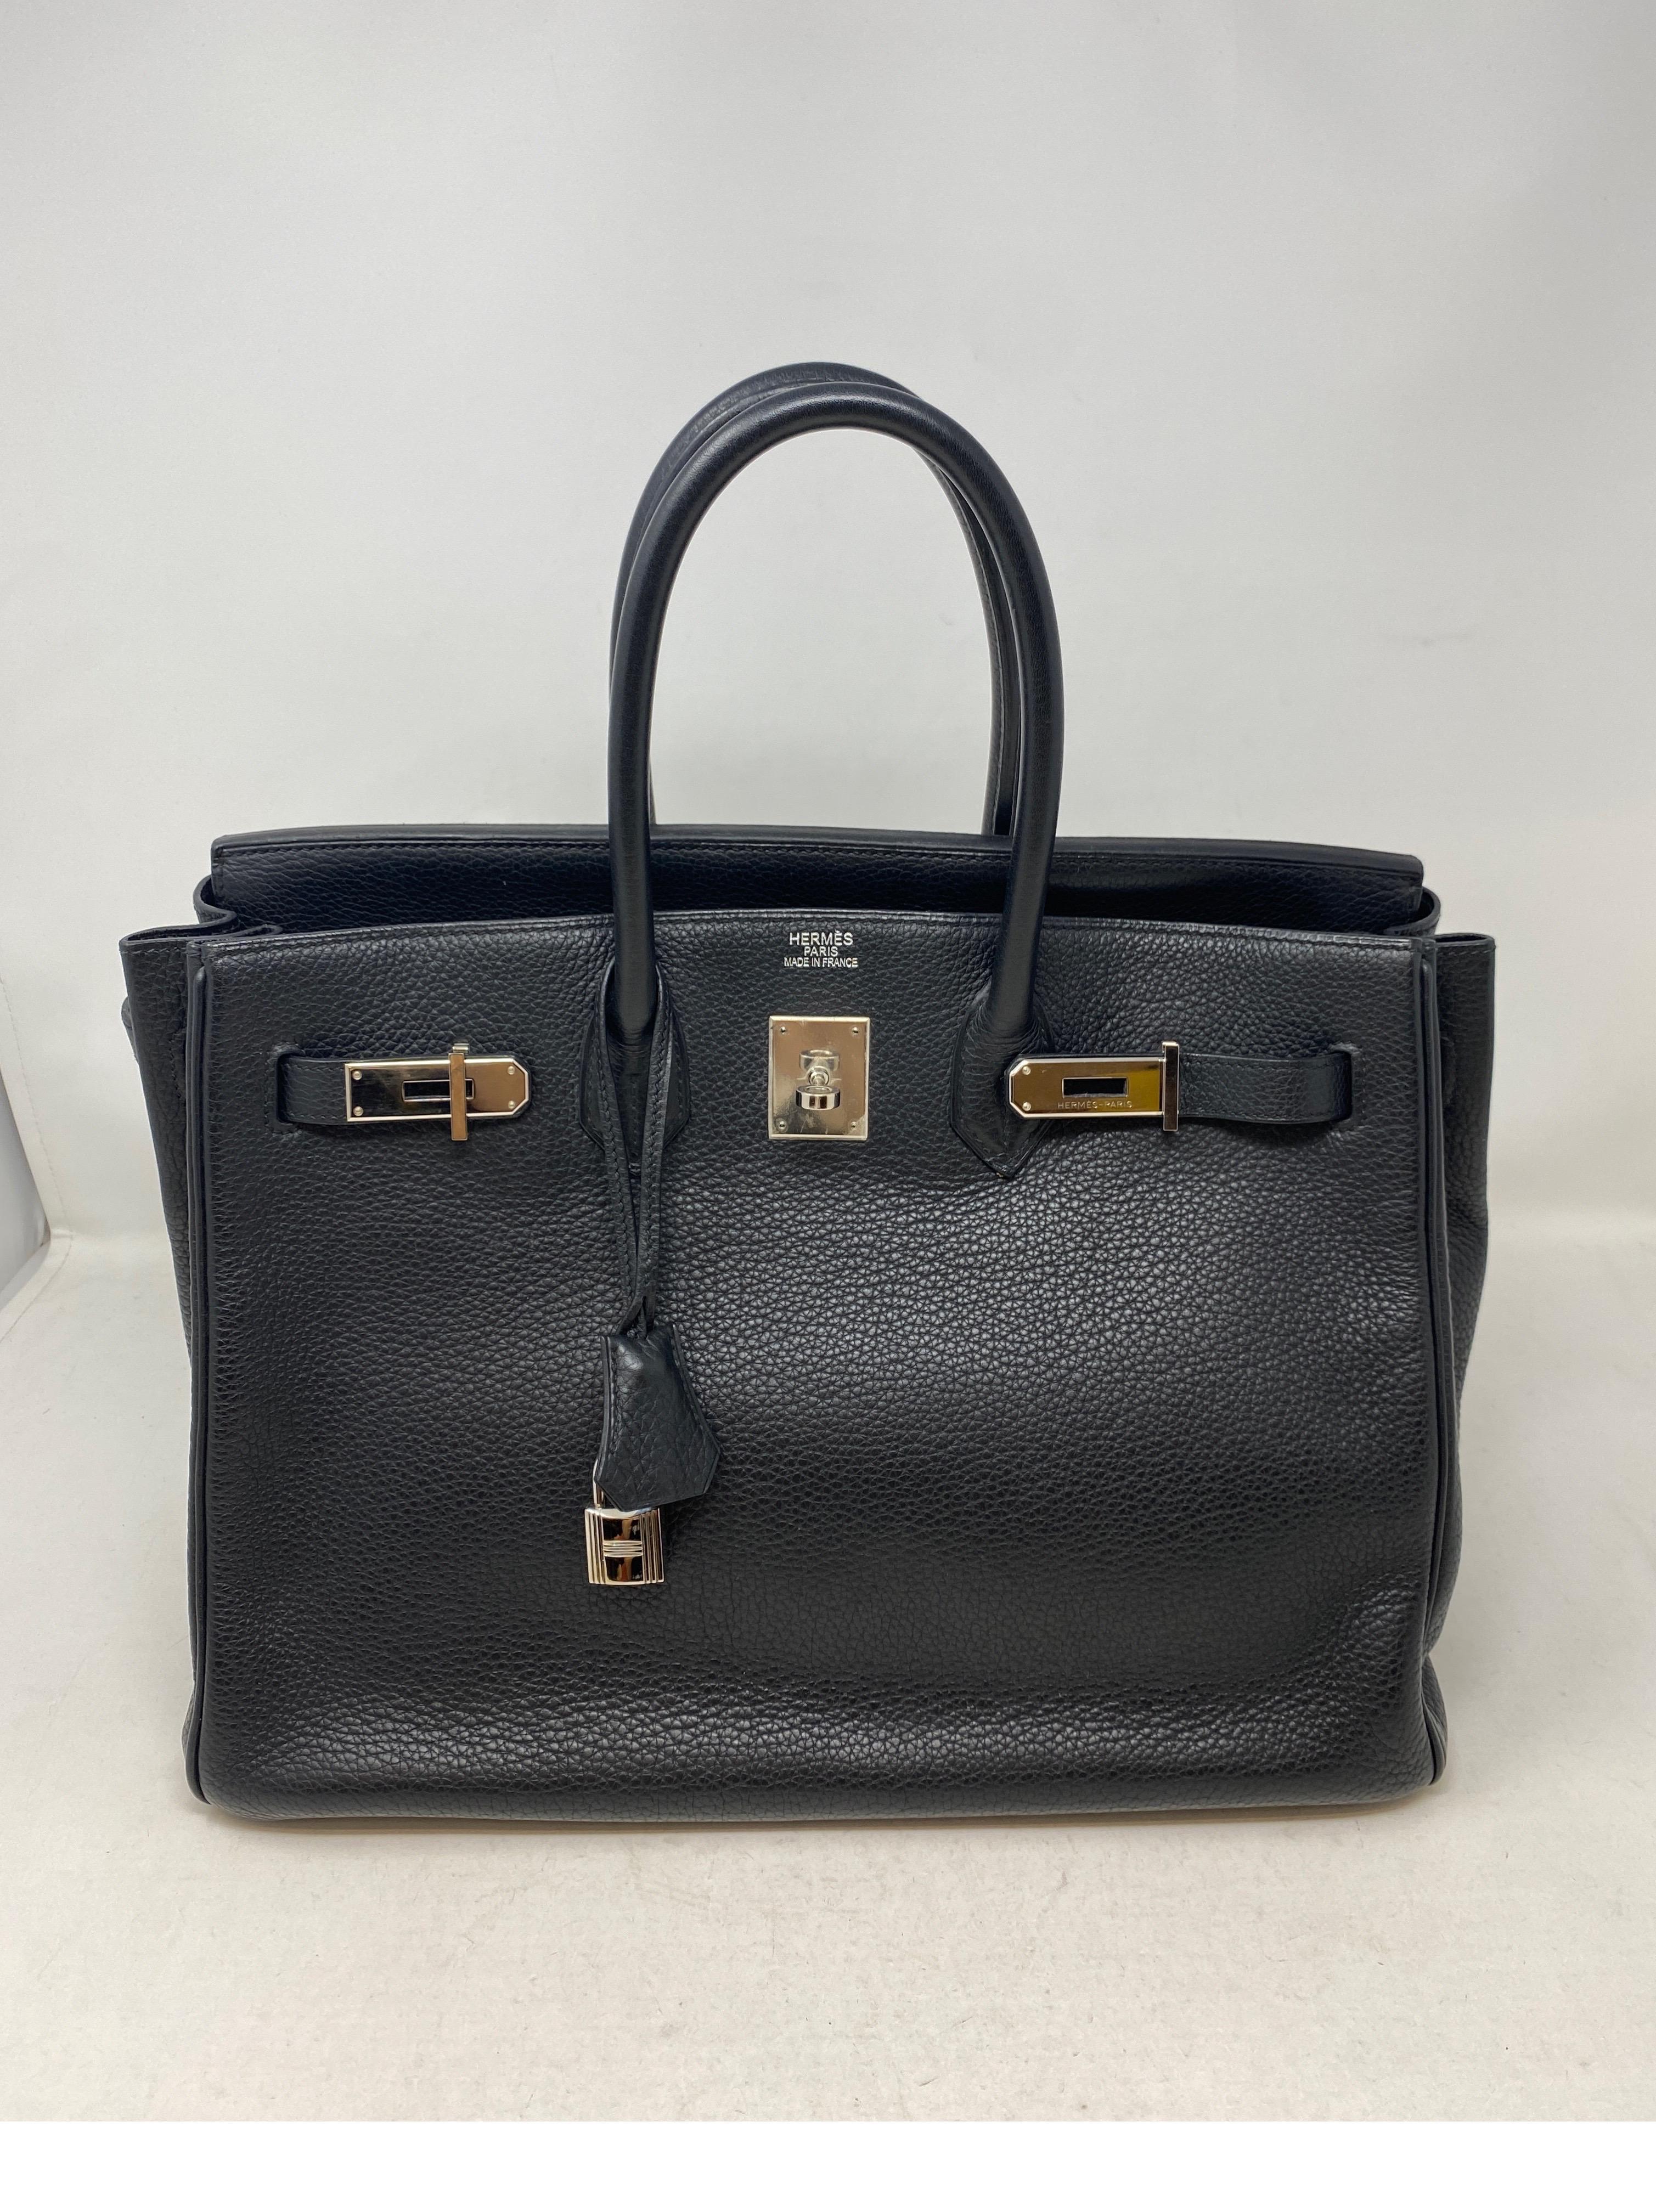 Hermes Black Birkin 35 Bag. Classic black color with palladium hardware. Excellent condition. Clemence leather. Beautiful and sturdy bag. Includes clochette, lock, keys, and dust cover. Guaranteed authentic. 